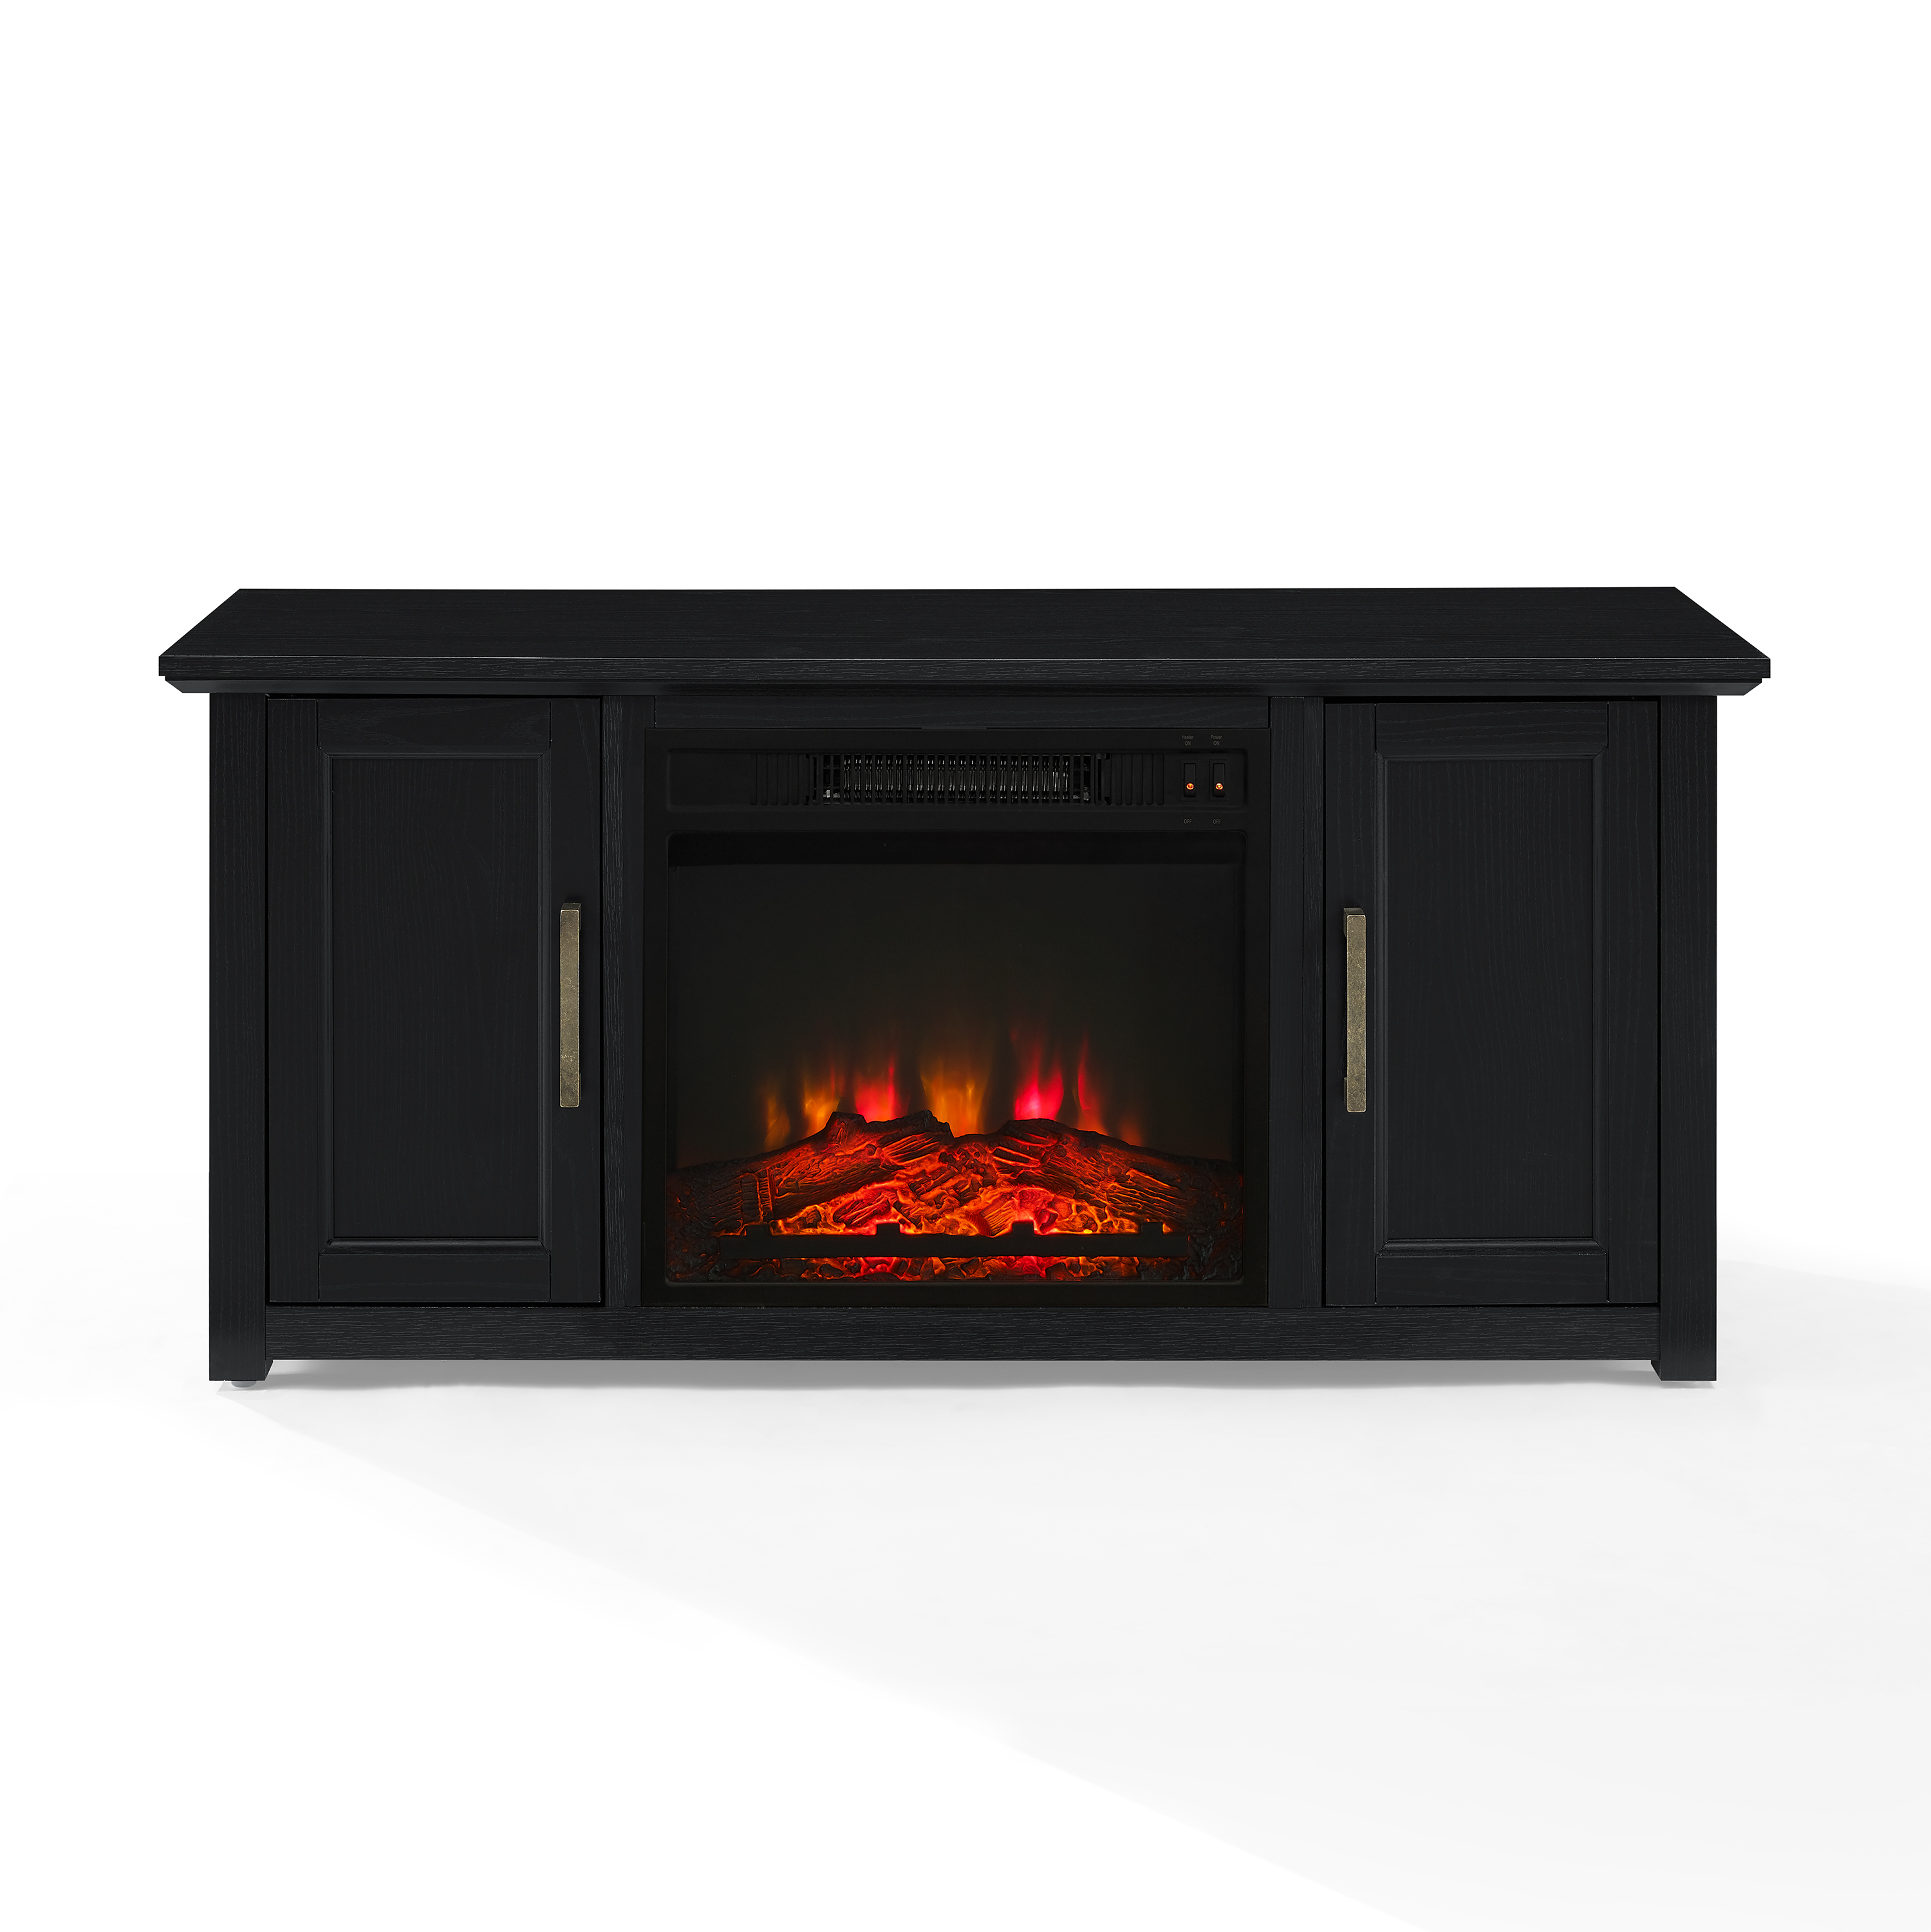 Crosley Furniture Camden 48" Low Profile Tv Stand with Fireplace in Black - image 1 of 17